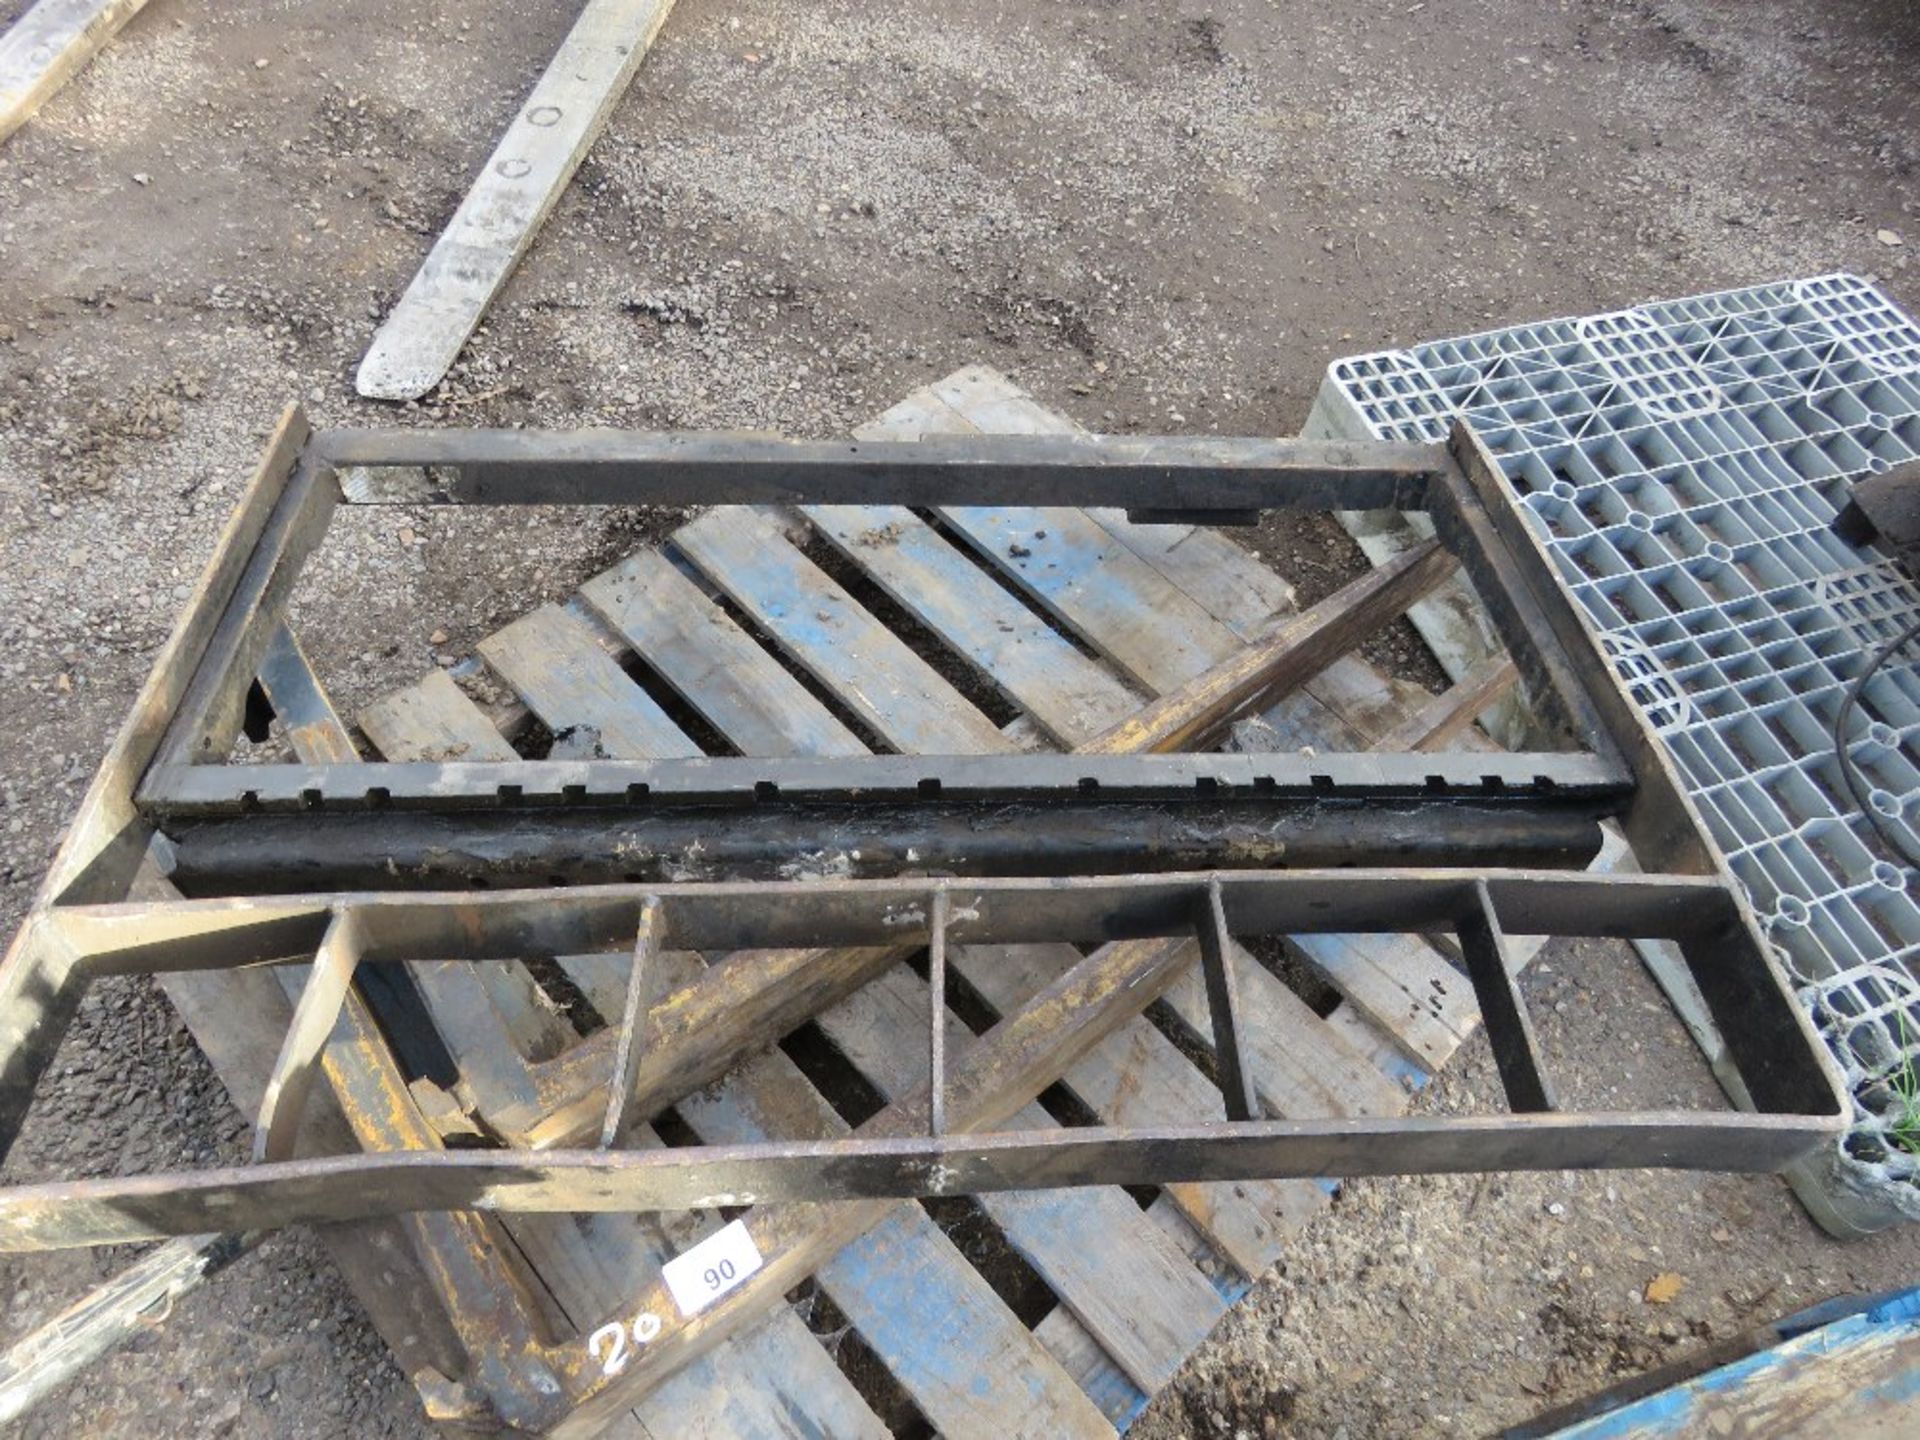 FORKLIFT BACKPLATE WITH FORKS, 20" CARRIAGE. - Image 2 of 3